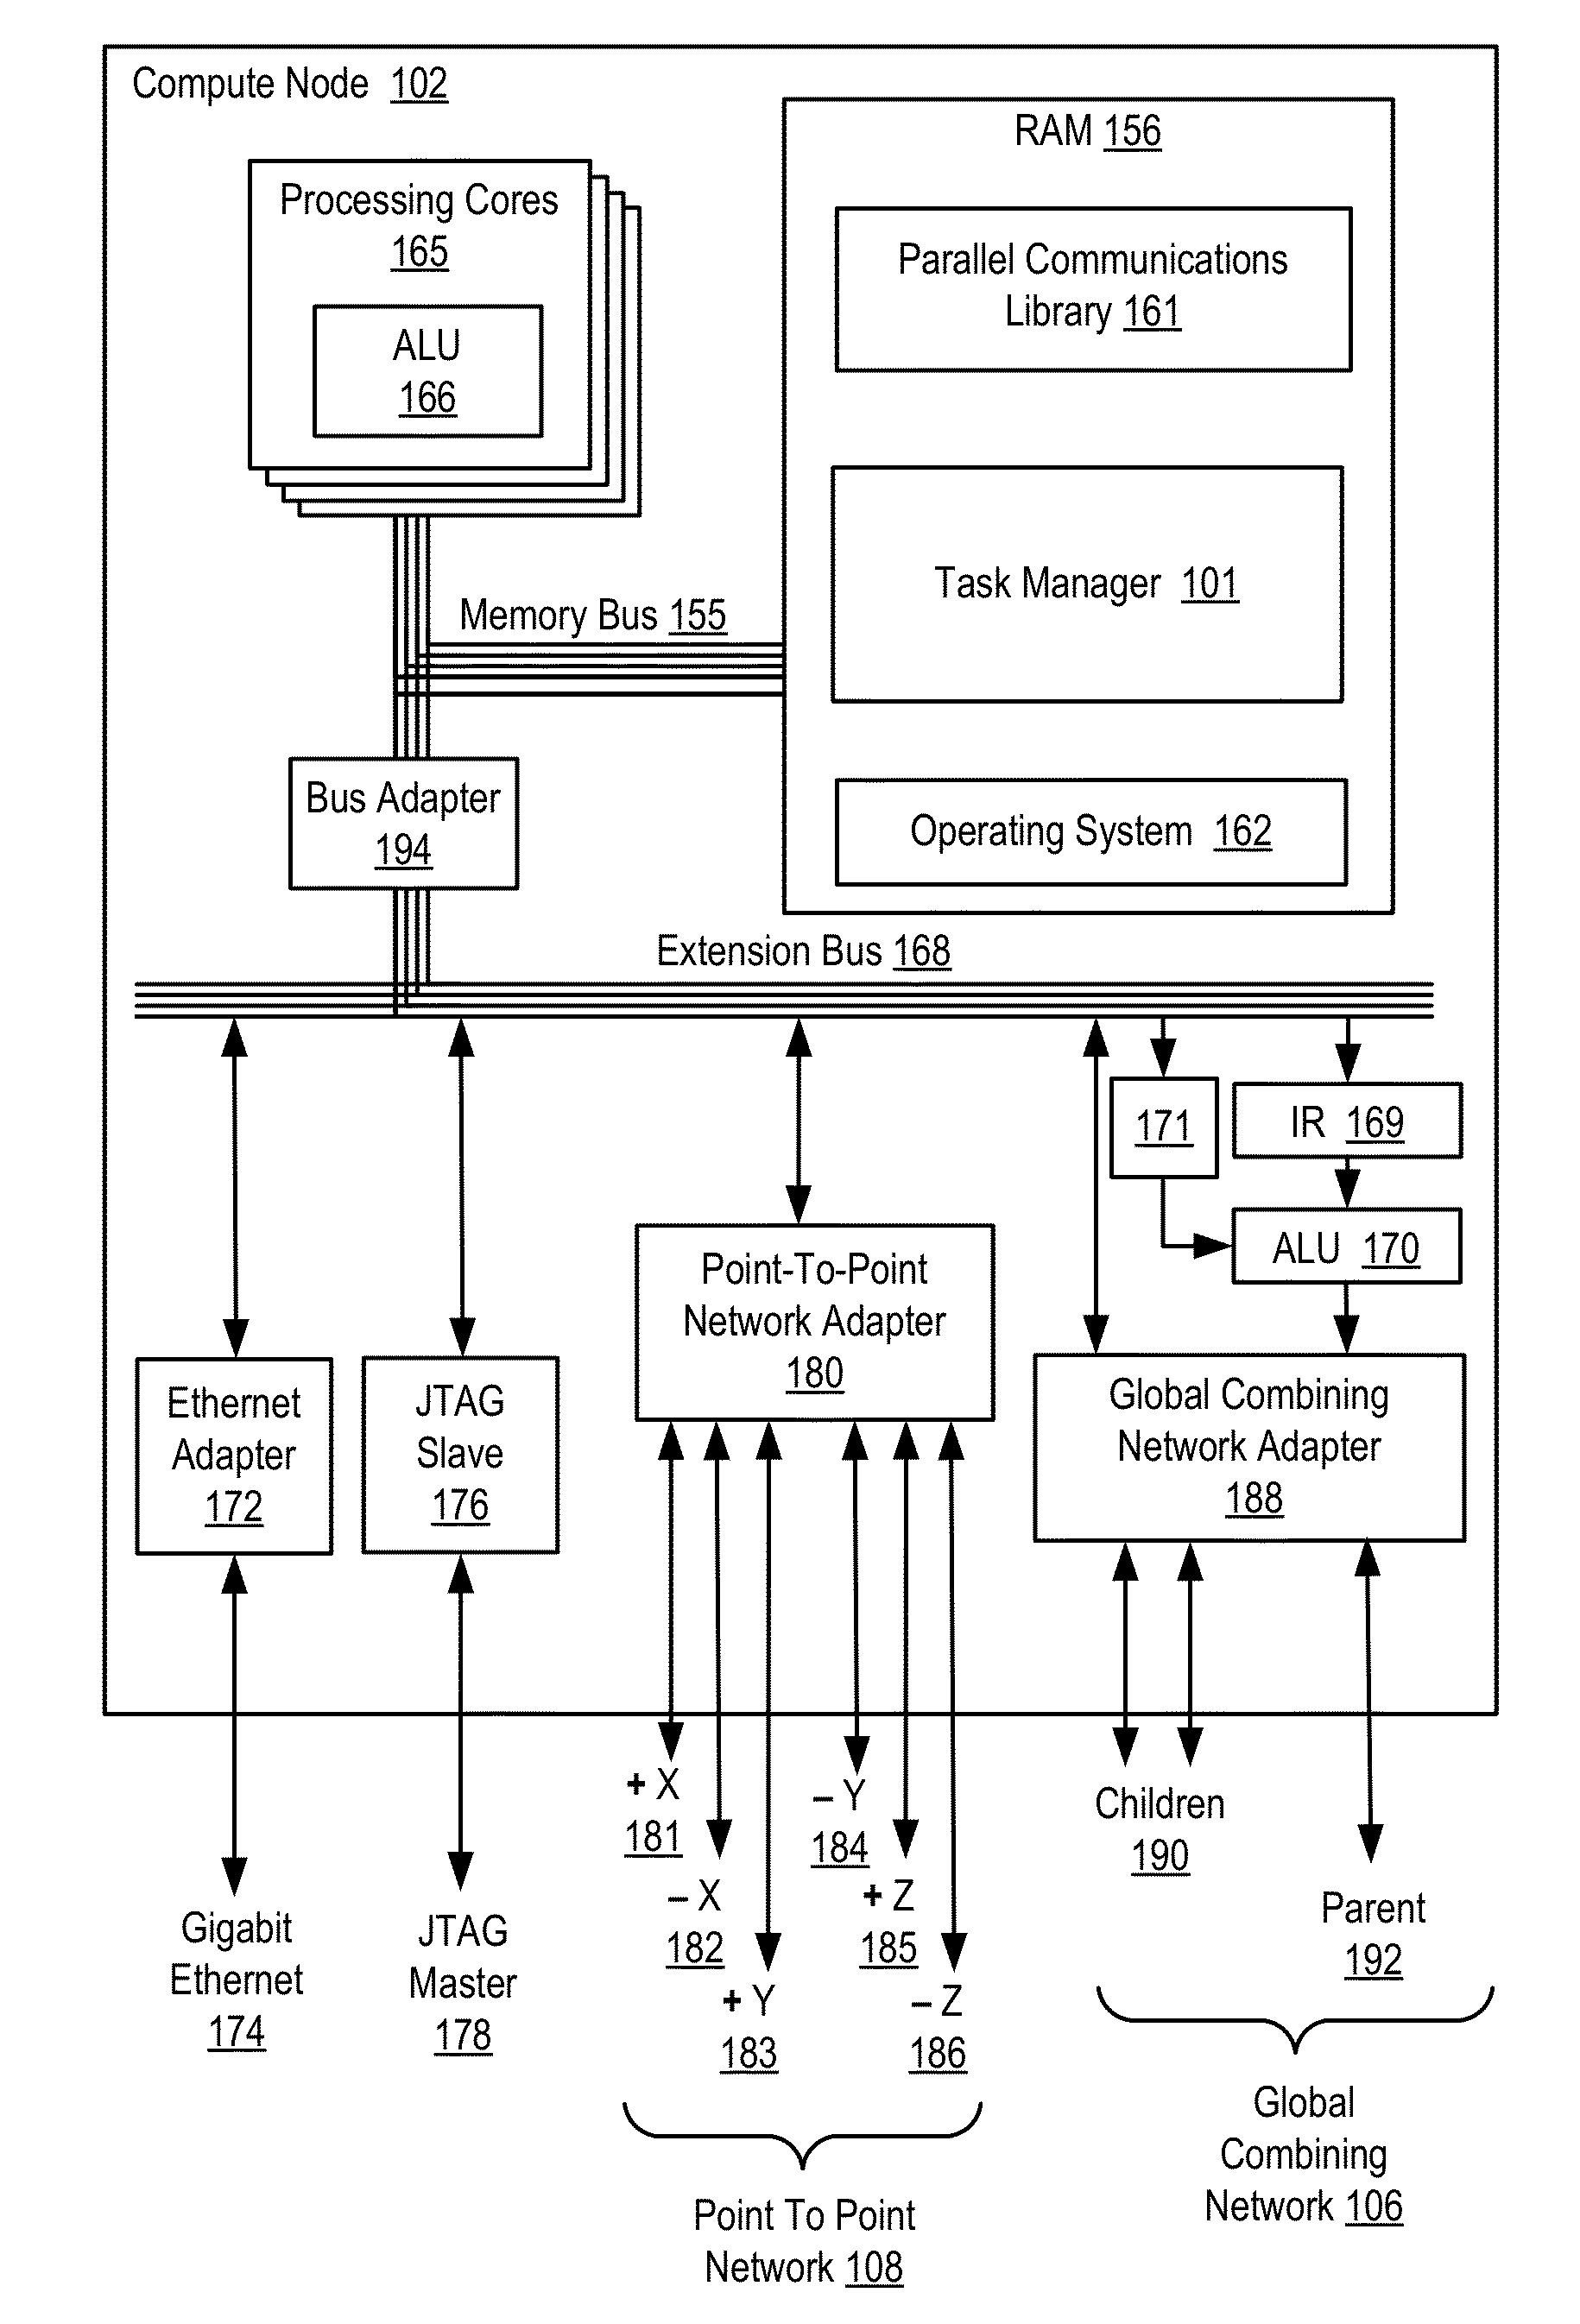 Performing Collective Operations In A Distributed Processing System